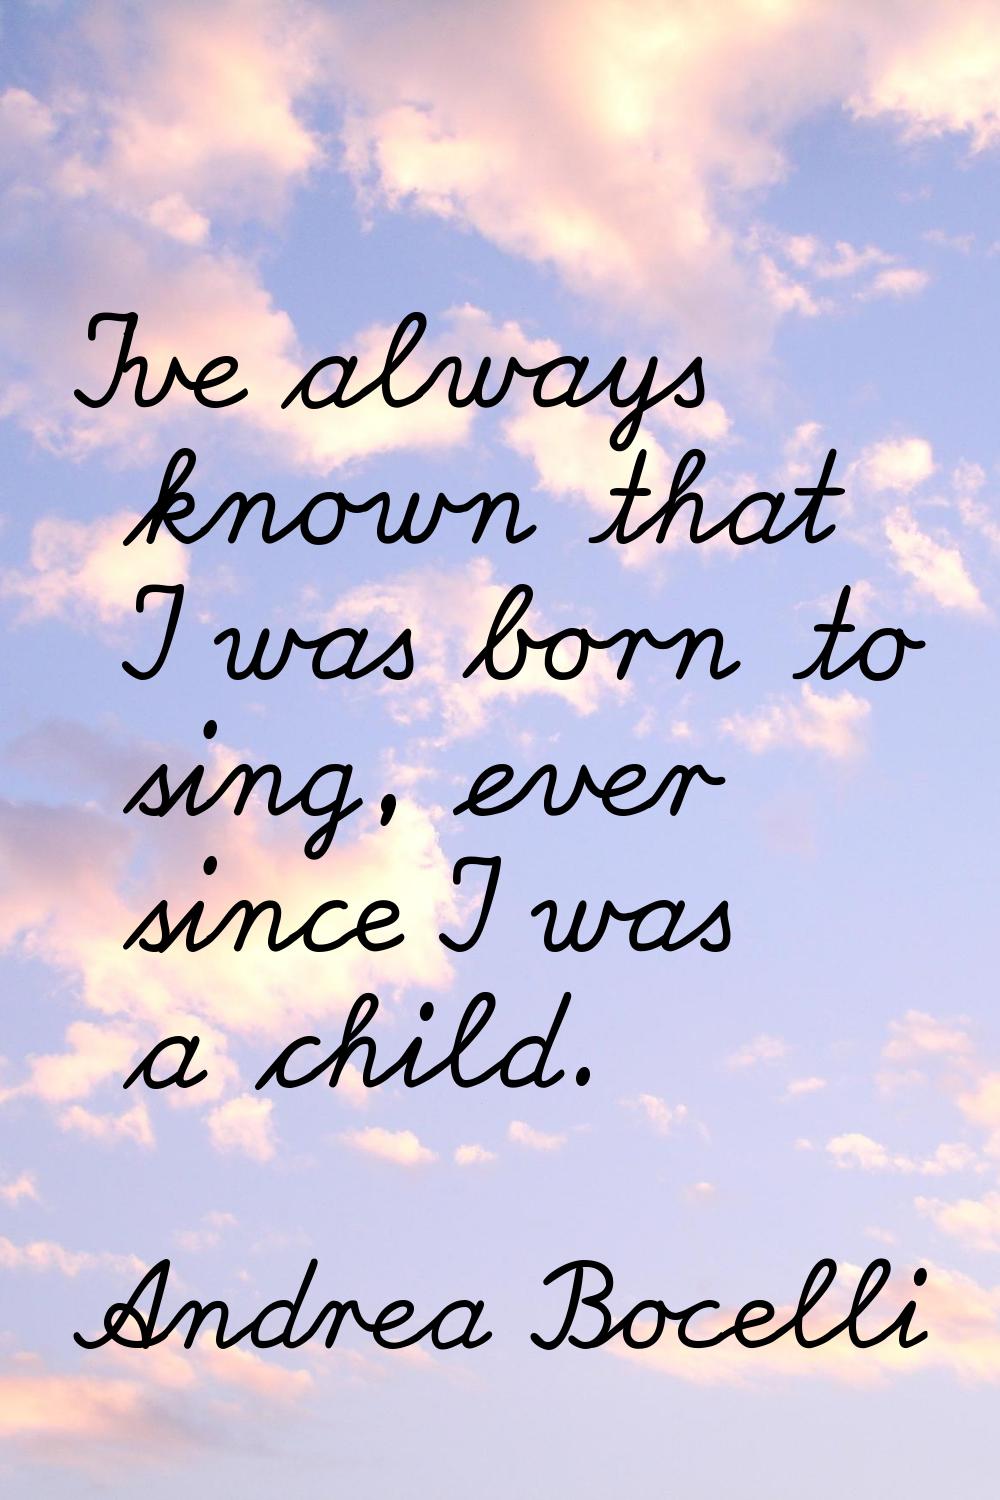 I've always known that I was born to sing, ever since I was a child.